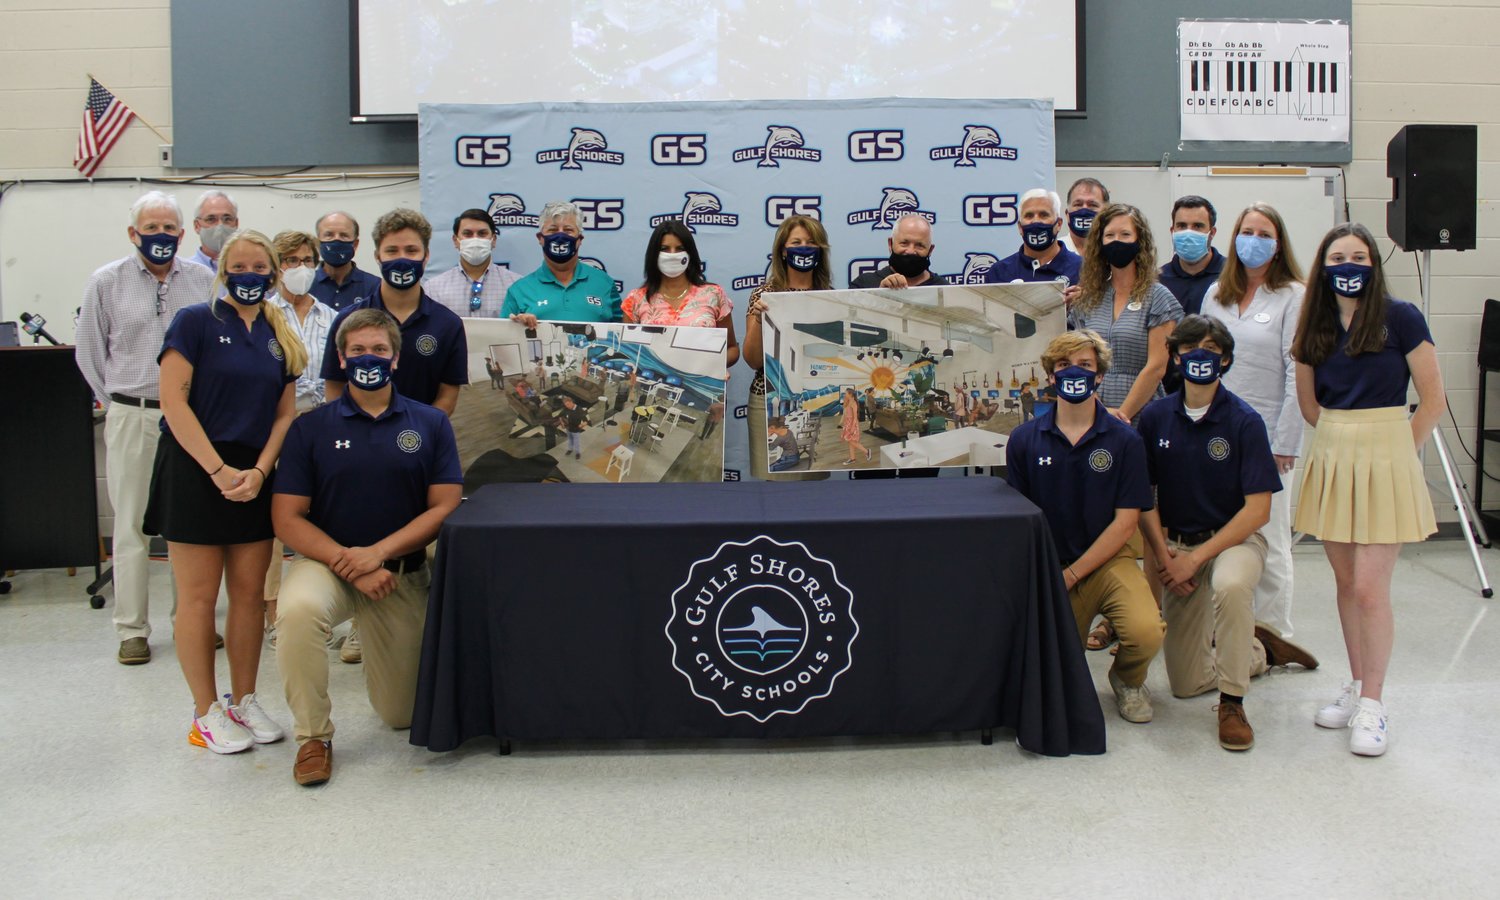 In September 2020, Gulf Shores City Schools announced an exciting partnership with The Hangout Hospitality Group during a news conference. The Hangout Hospitality Group is gifting $100,000 to build a state of the art, industry-leading music lab for students. The funds will be directed through the Dolphin Foundation for Education and Arts.